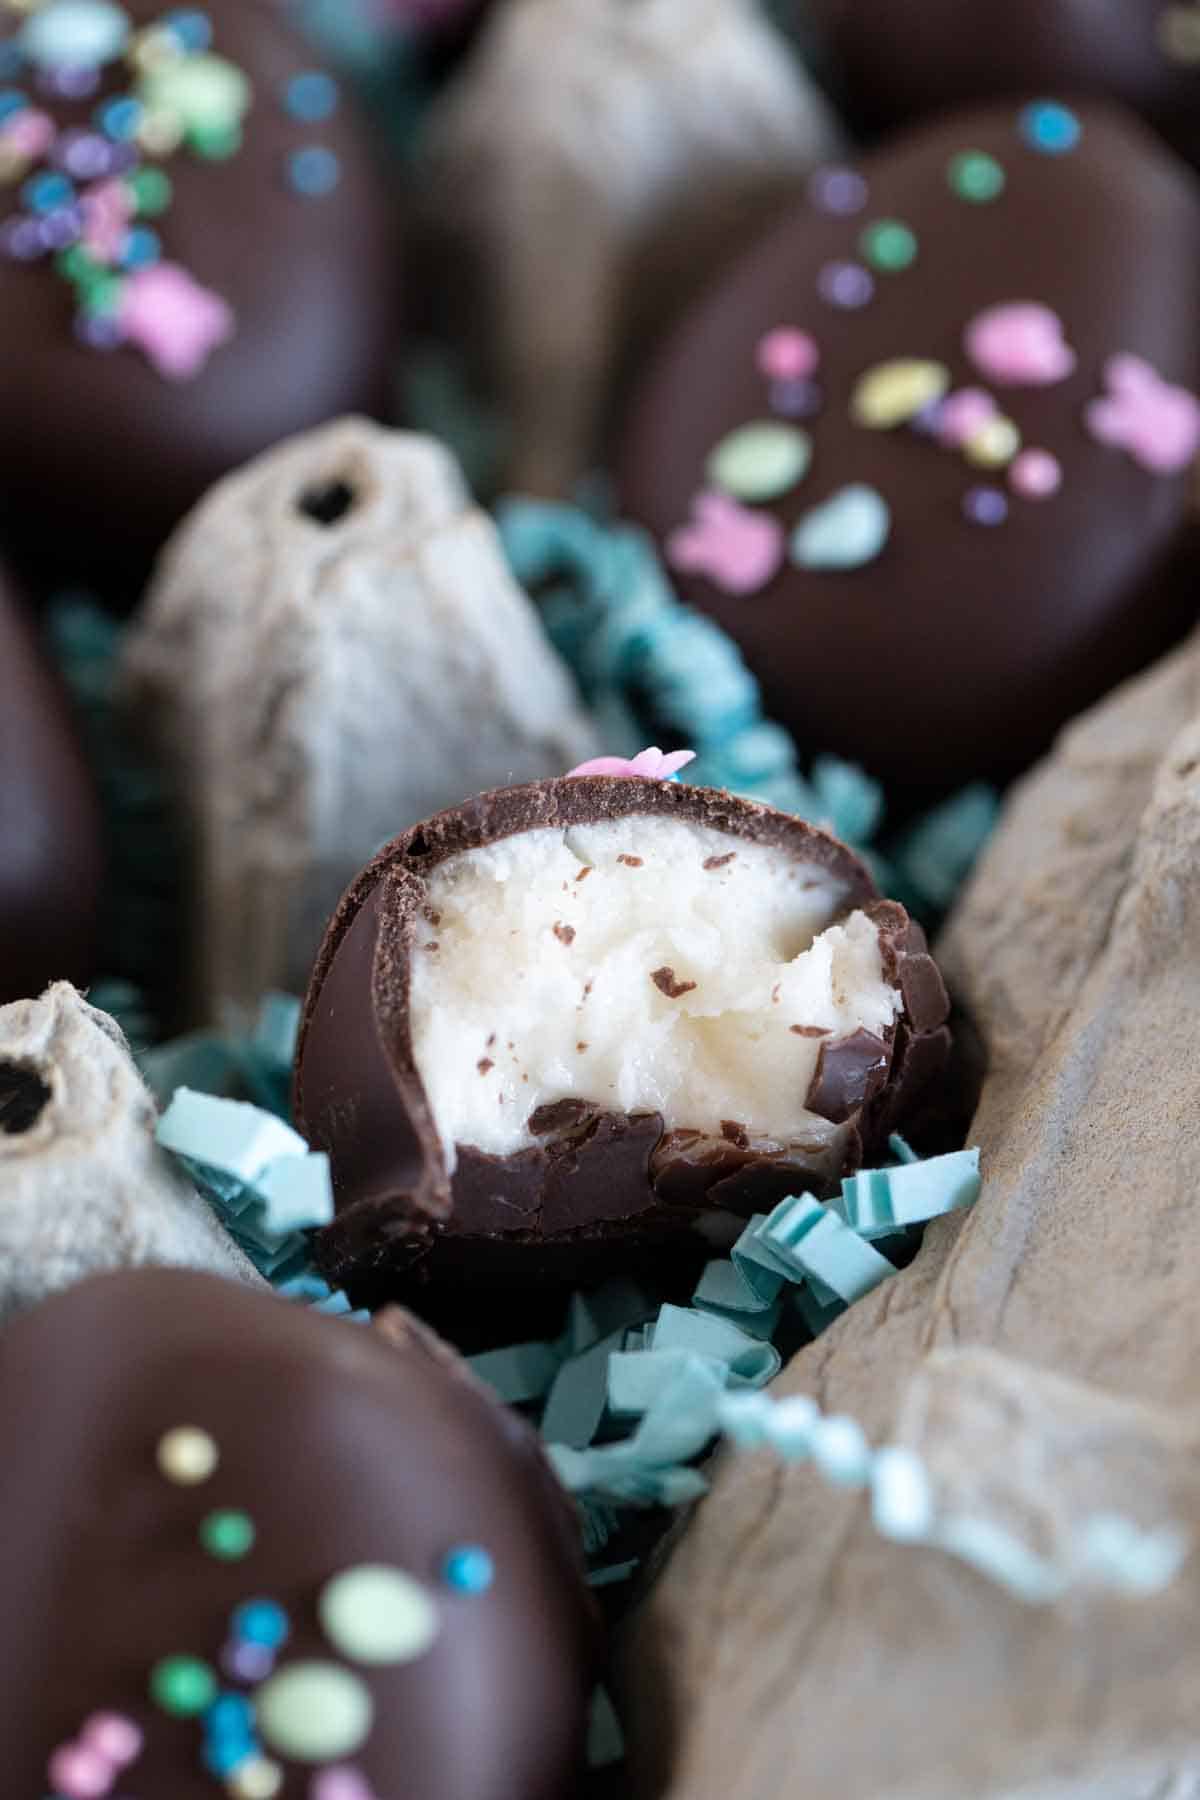 marshmallow creme truffle with a bite taken to show inside texture